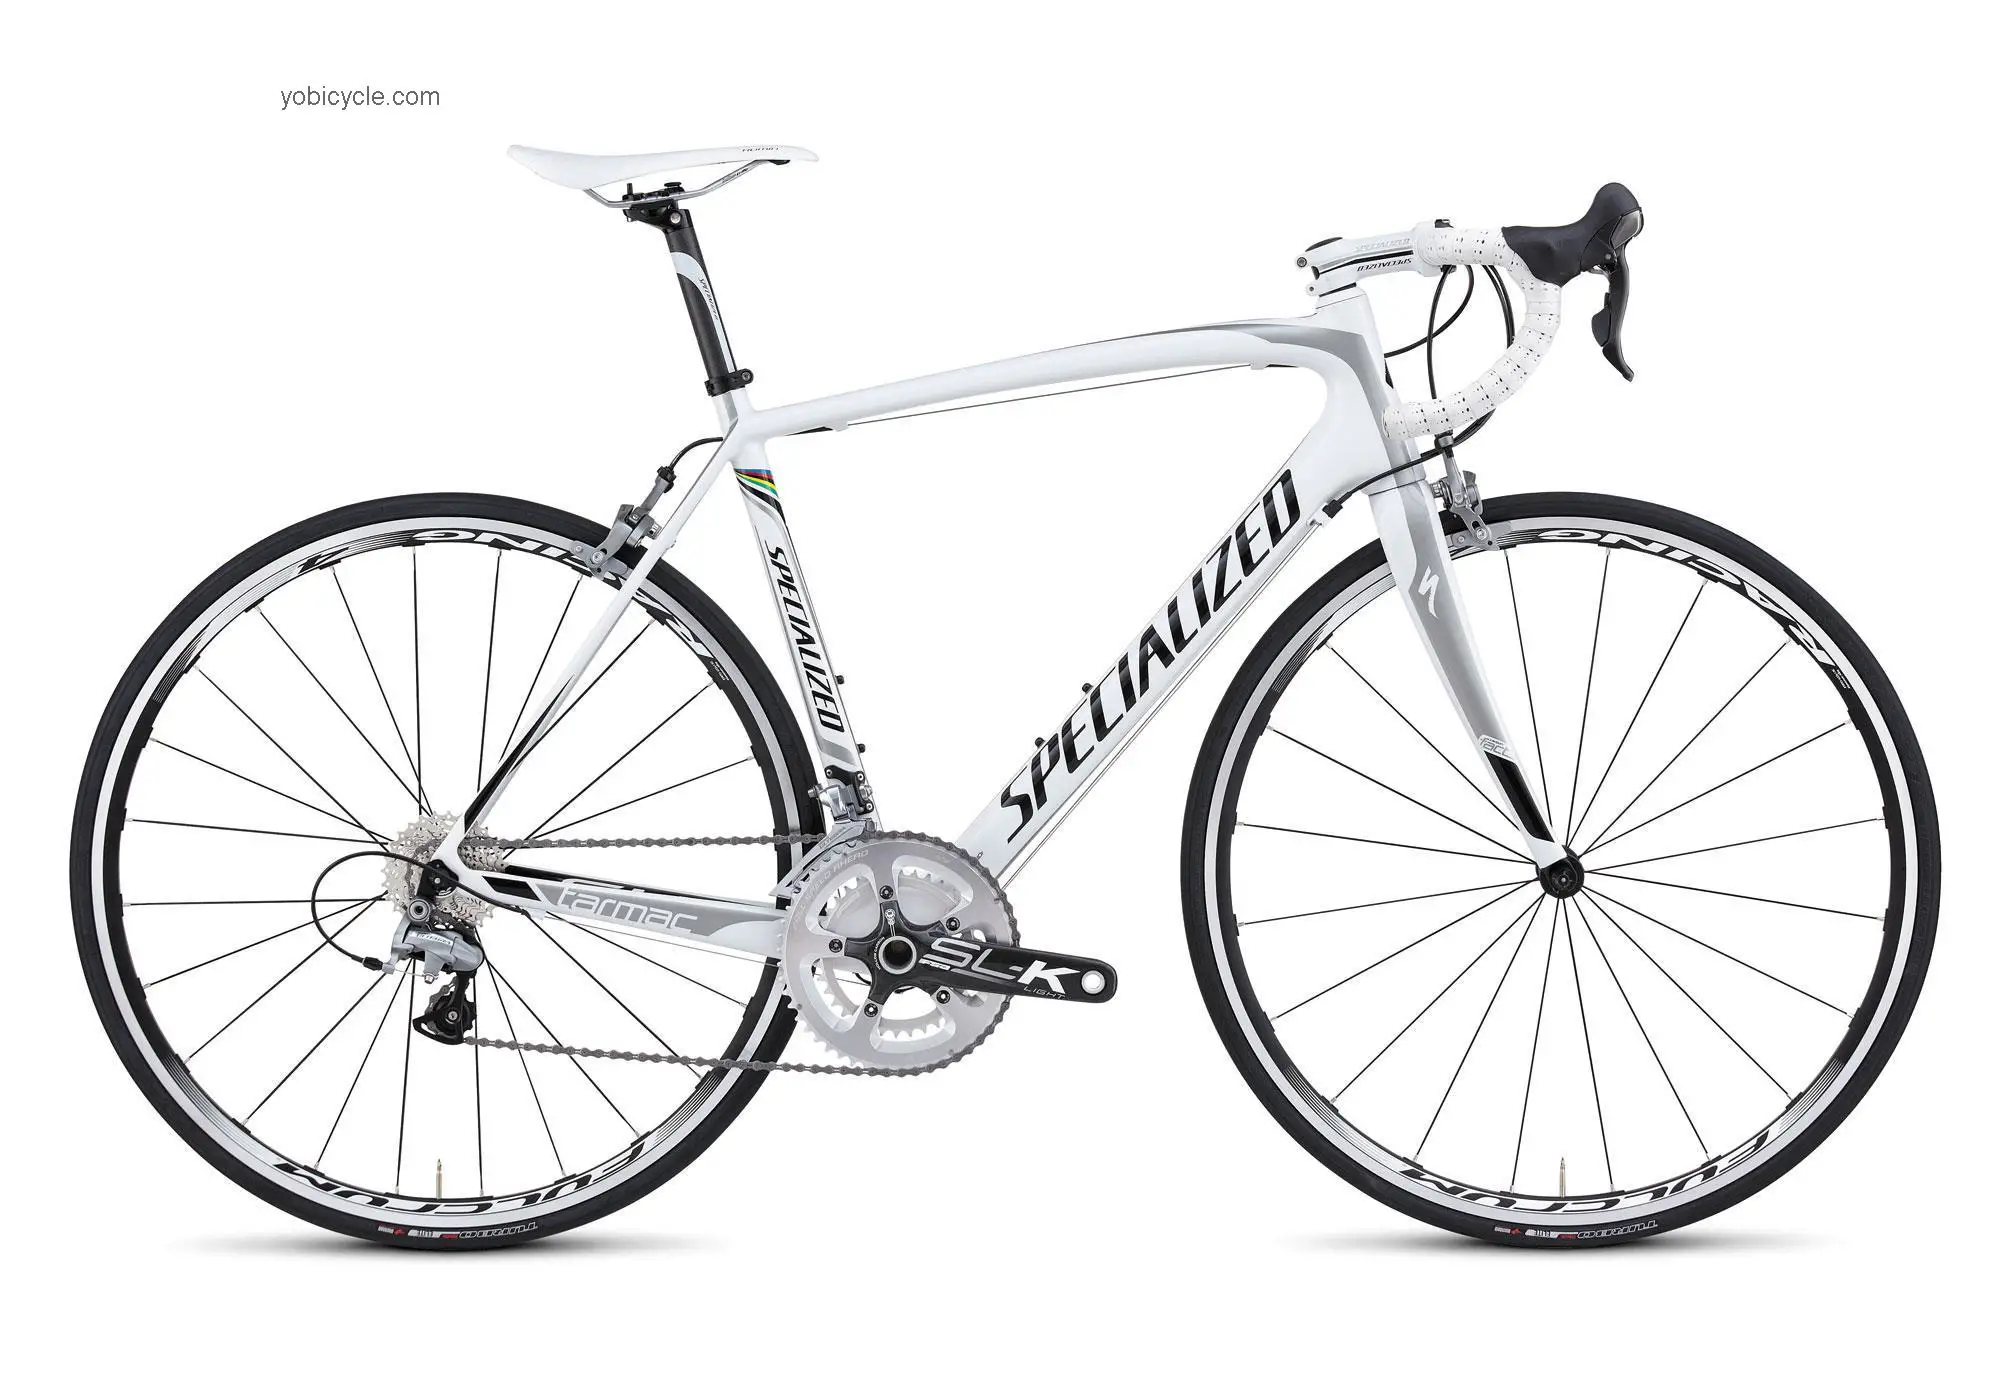 Specialized Tarmac Expert SL3 M2 2012 comparison online with competitors